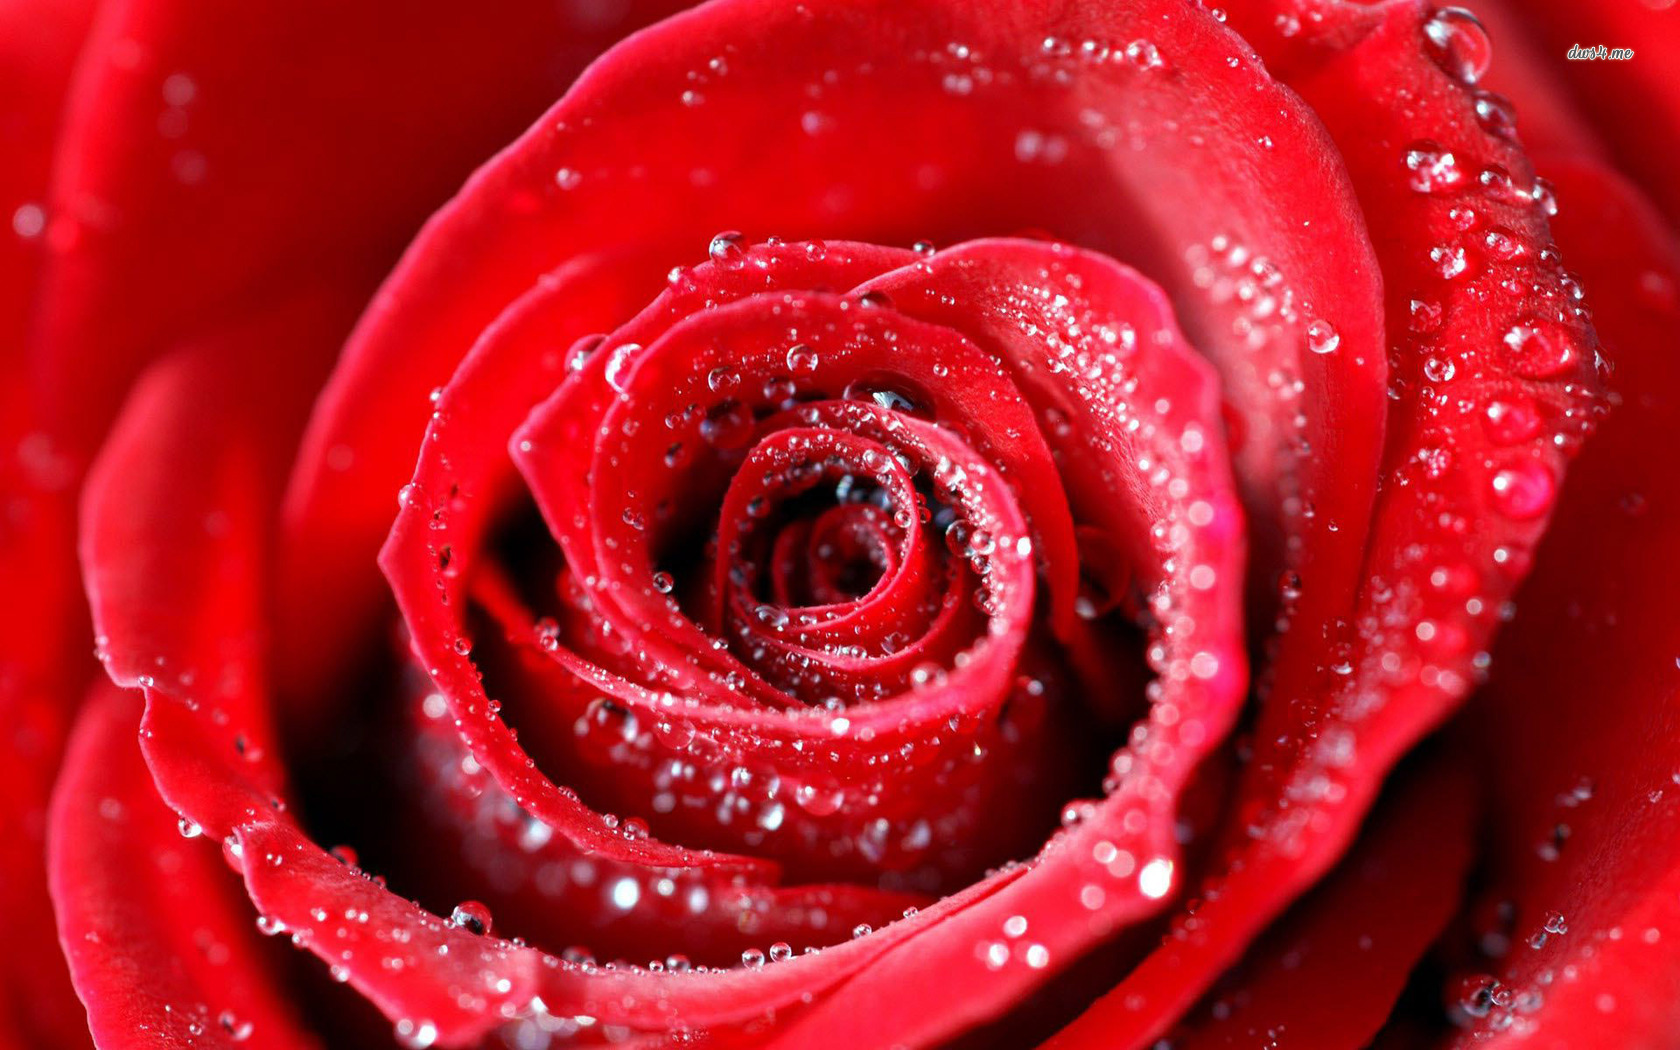 Water Drops Background Pictures chillcovercom Rose With Water Drops